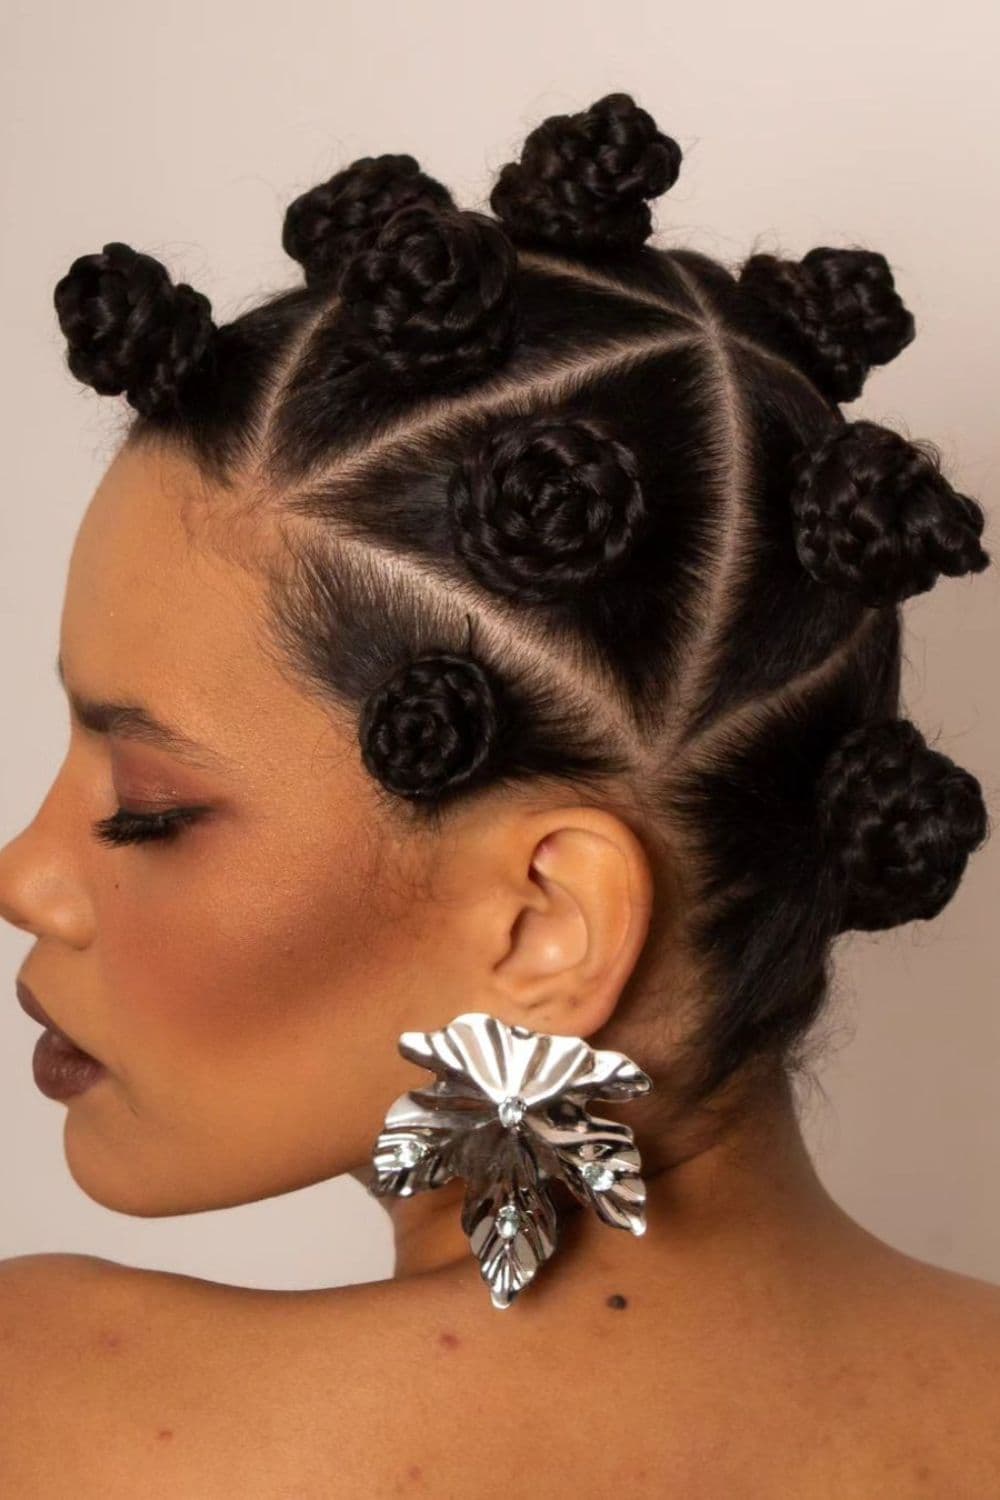 Side view of a woman wearing a silver leaf earring with box braids into Bantu knots.